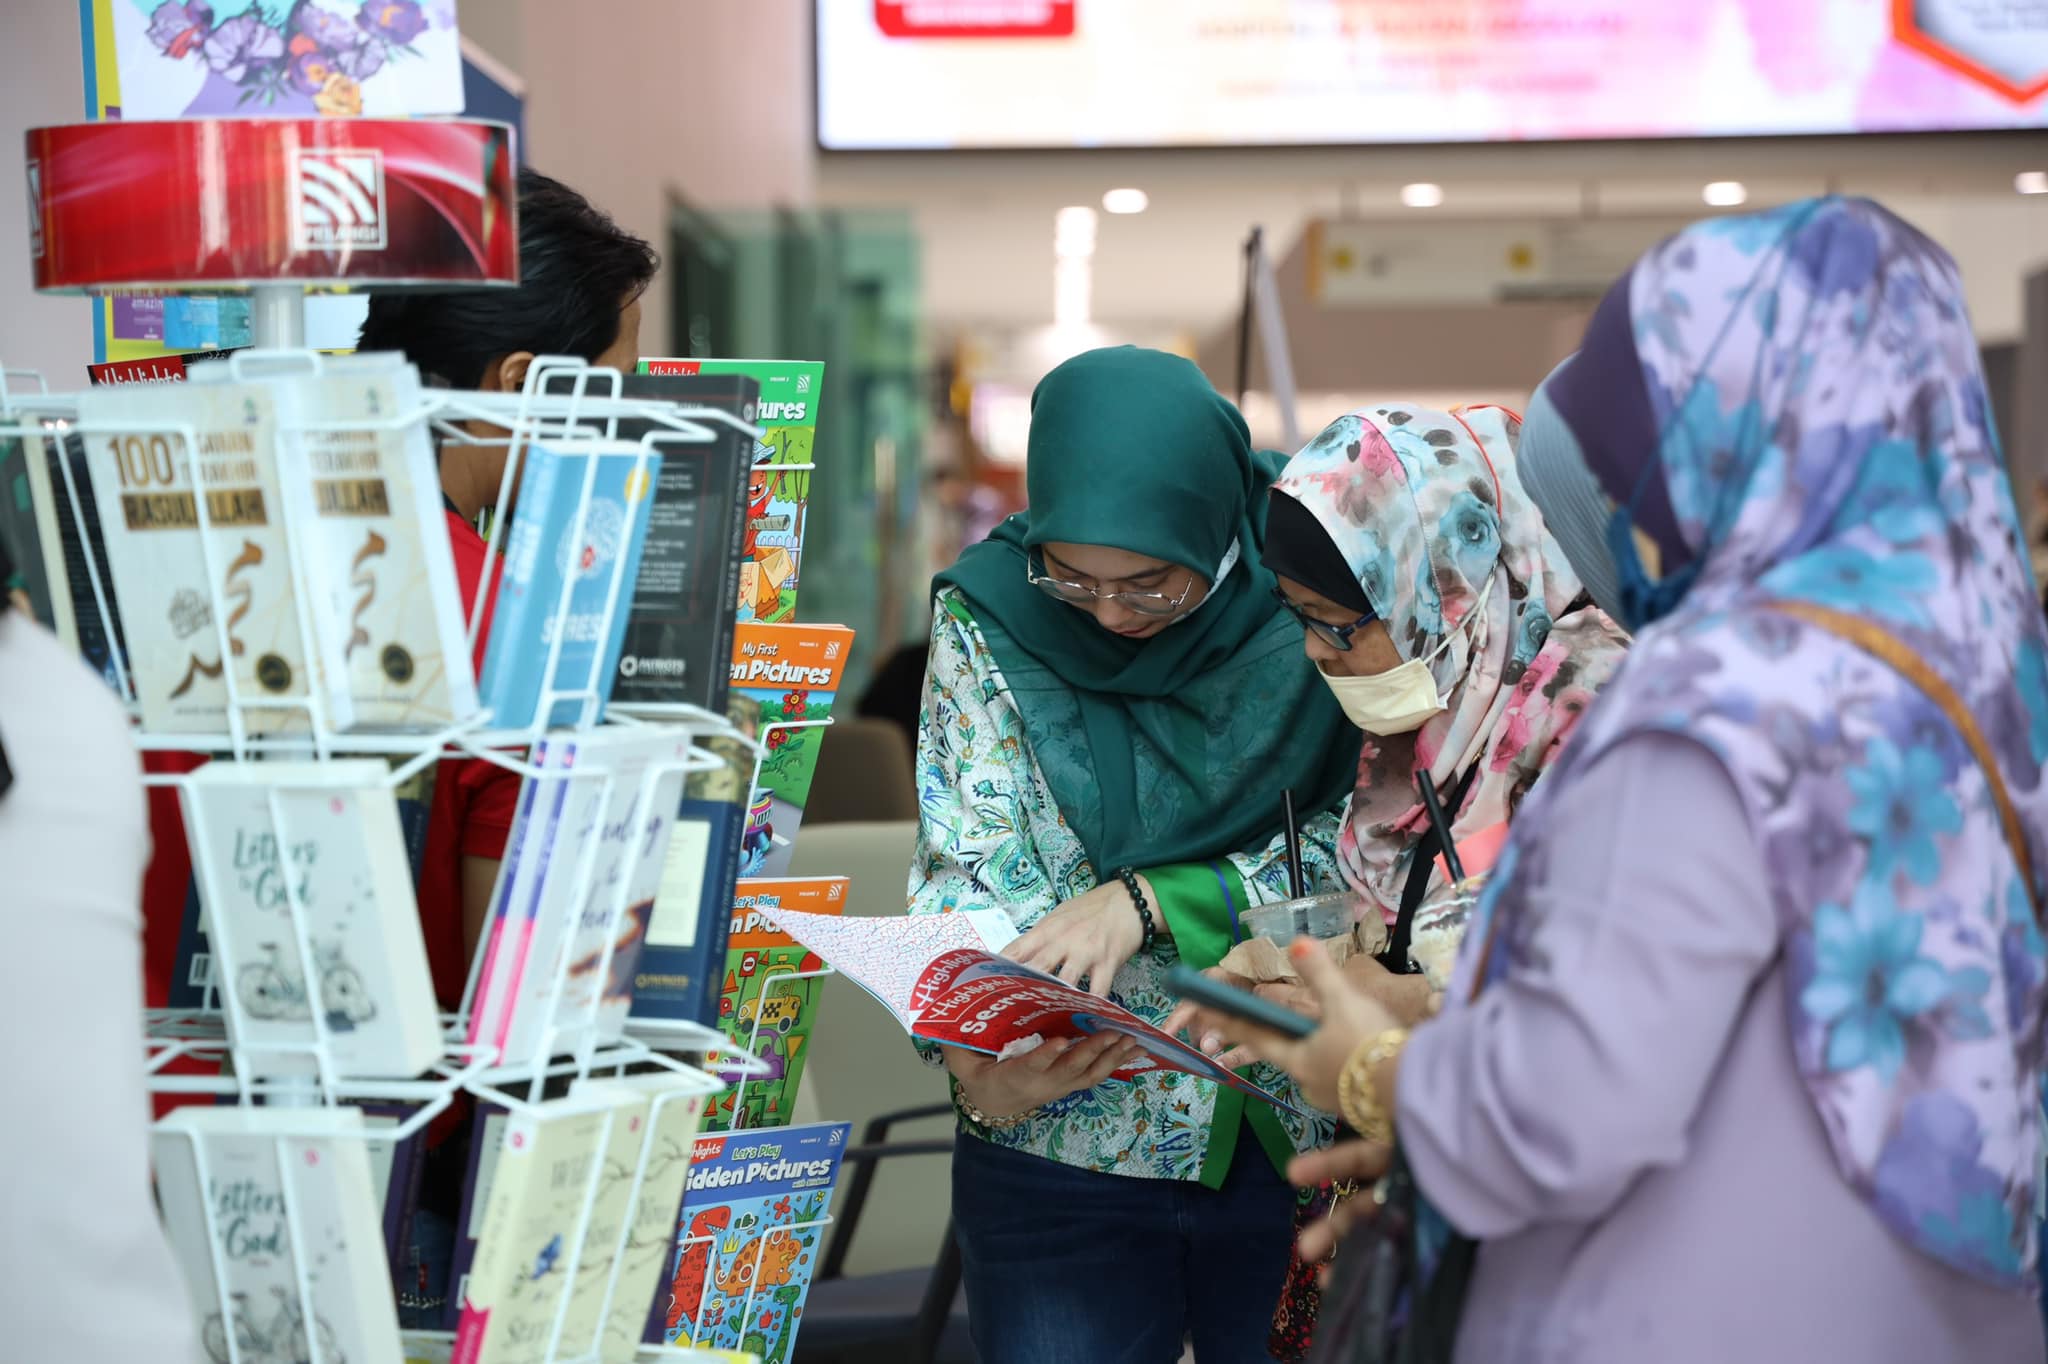 LIBRARY OPEN DAY FOSTERS THE CULTURE OF INTEREST IN READING AMONG THE CITIZENS